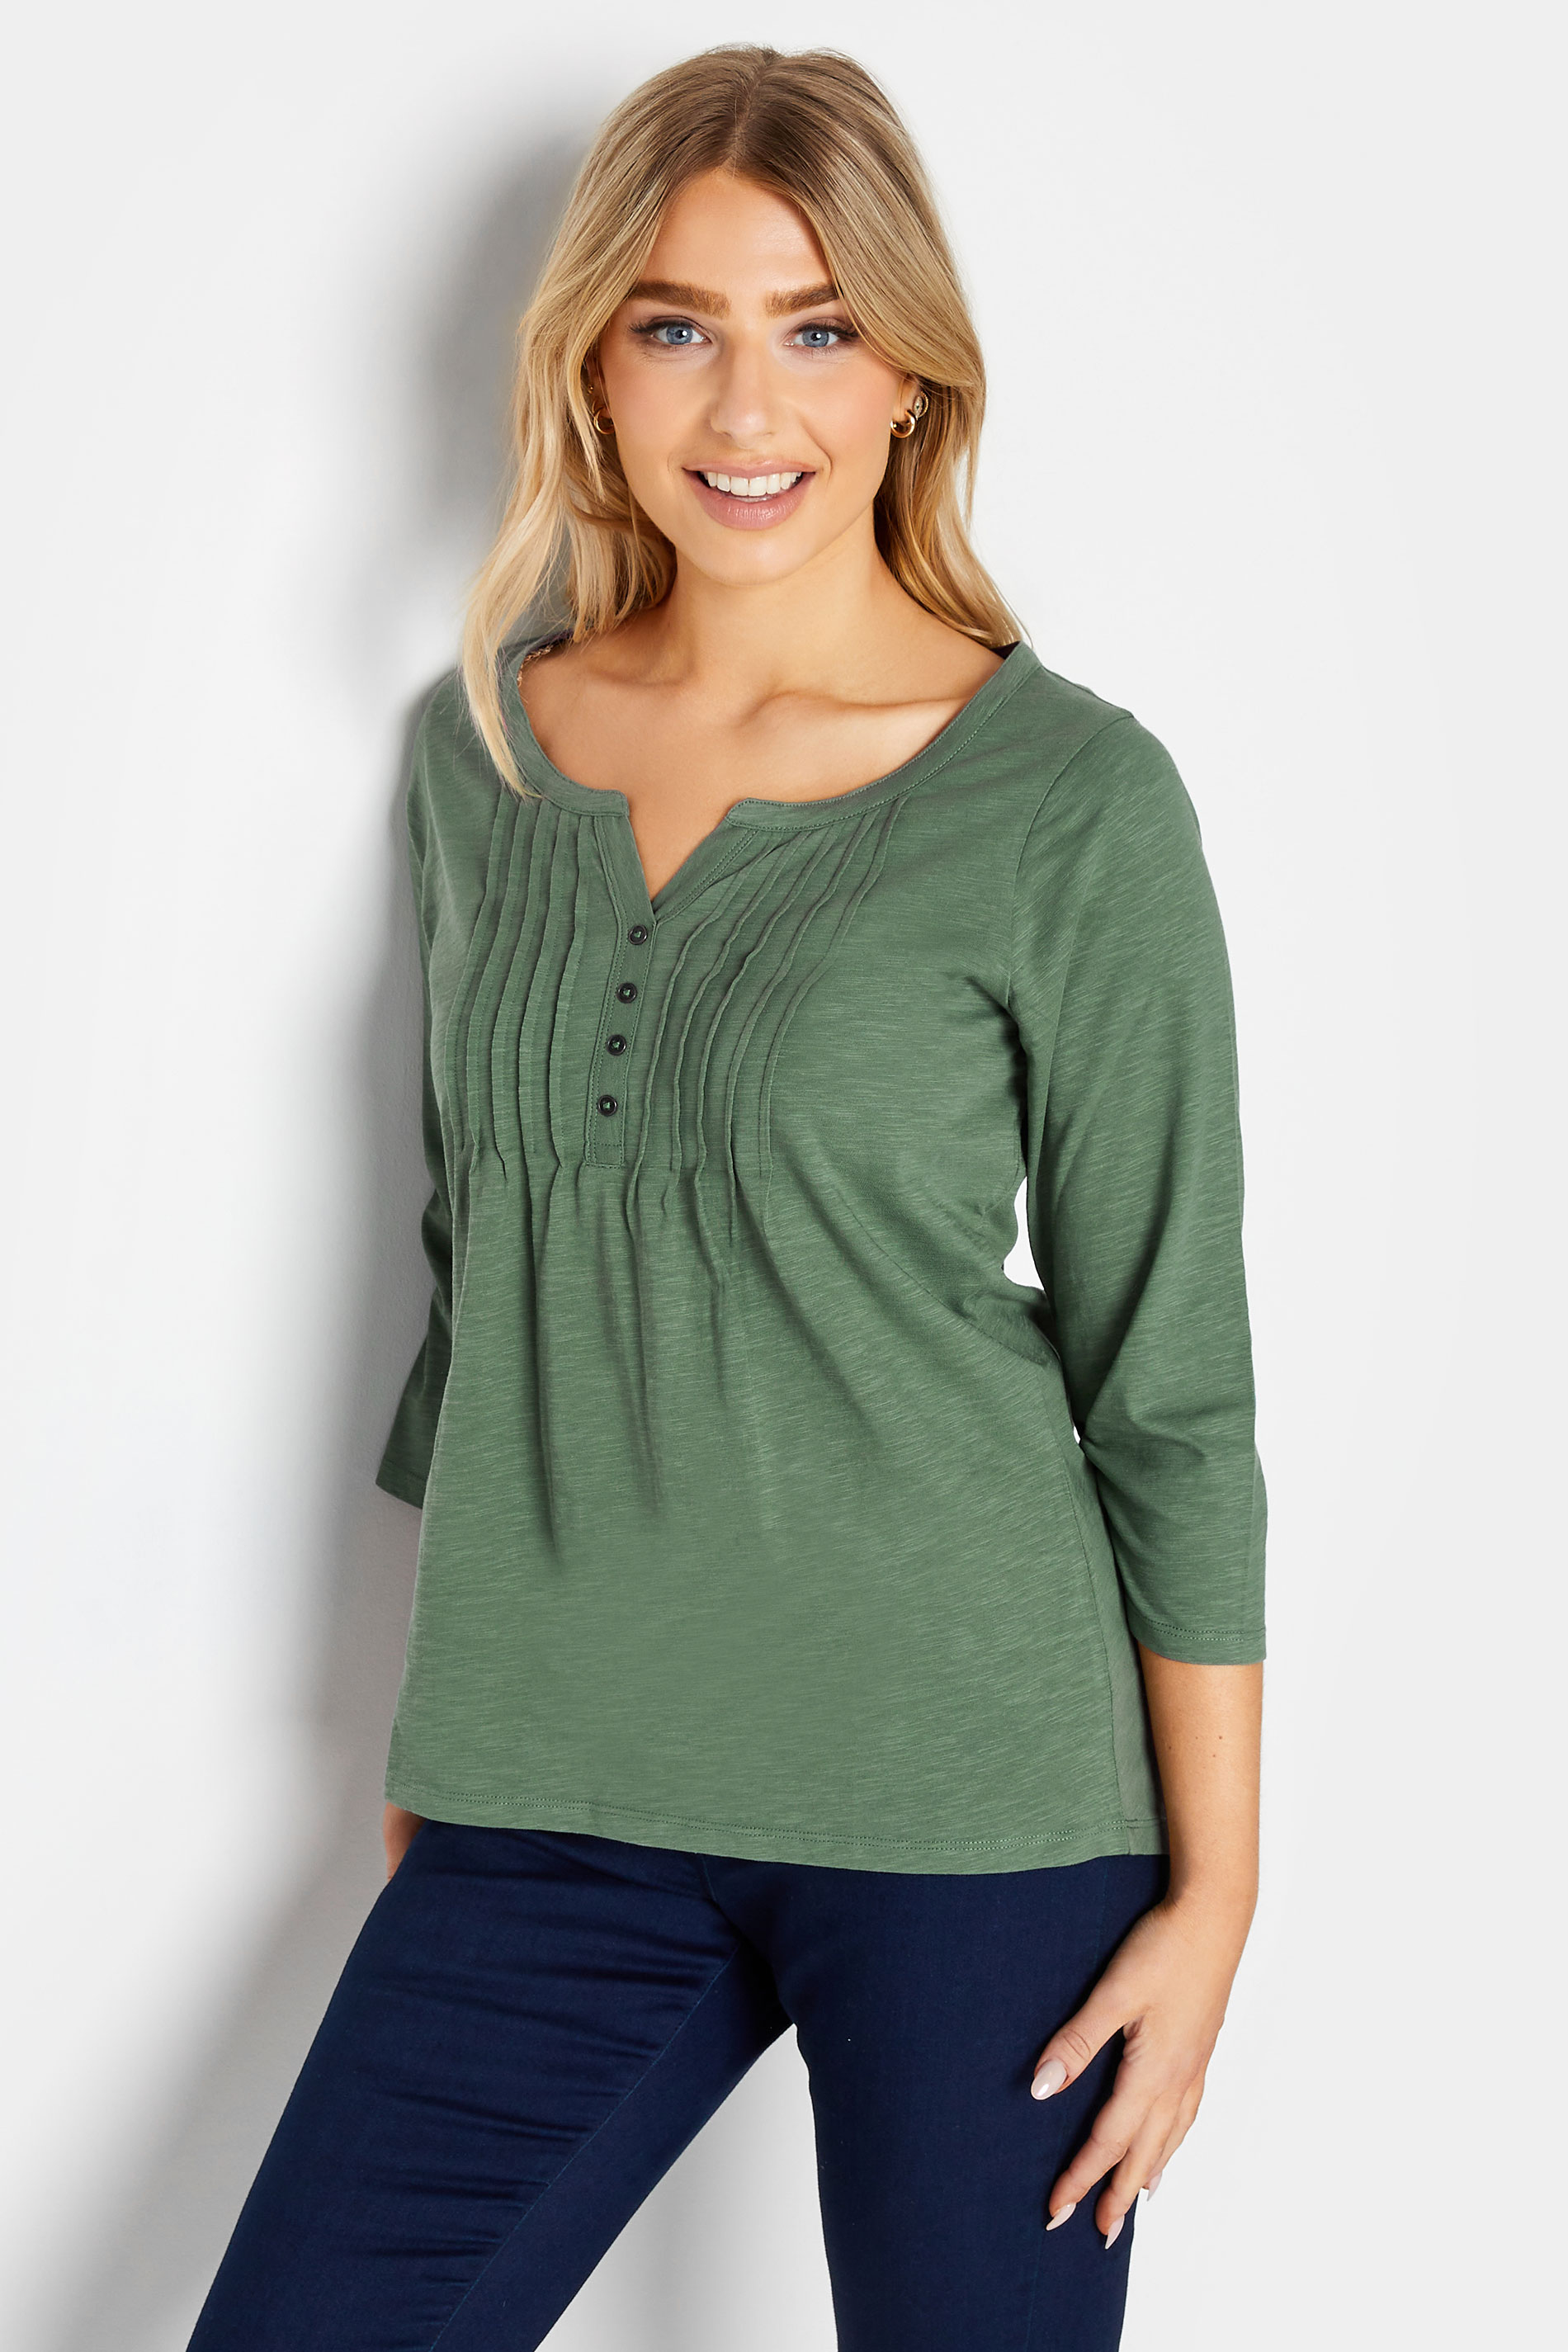 M&Co Sage Green Cotton Henley Top | M&Co